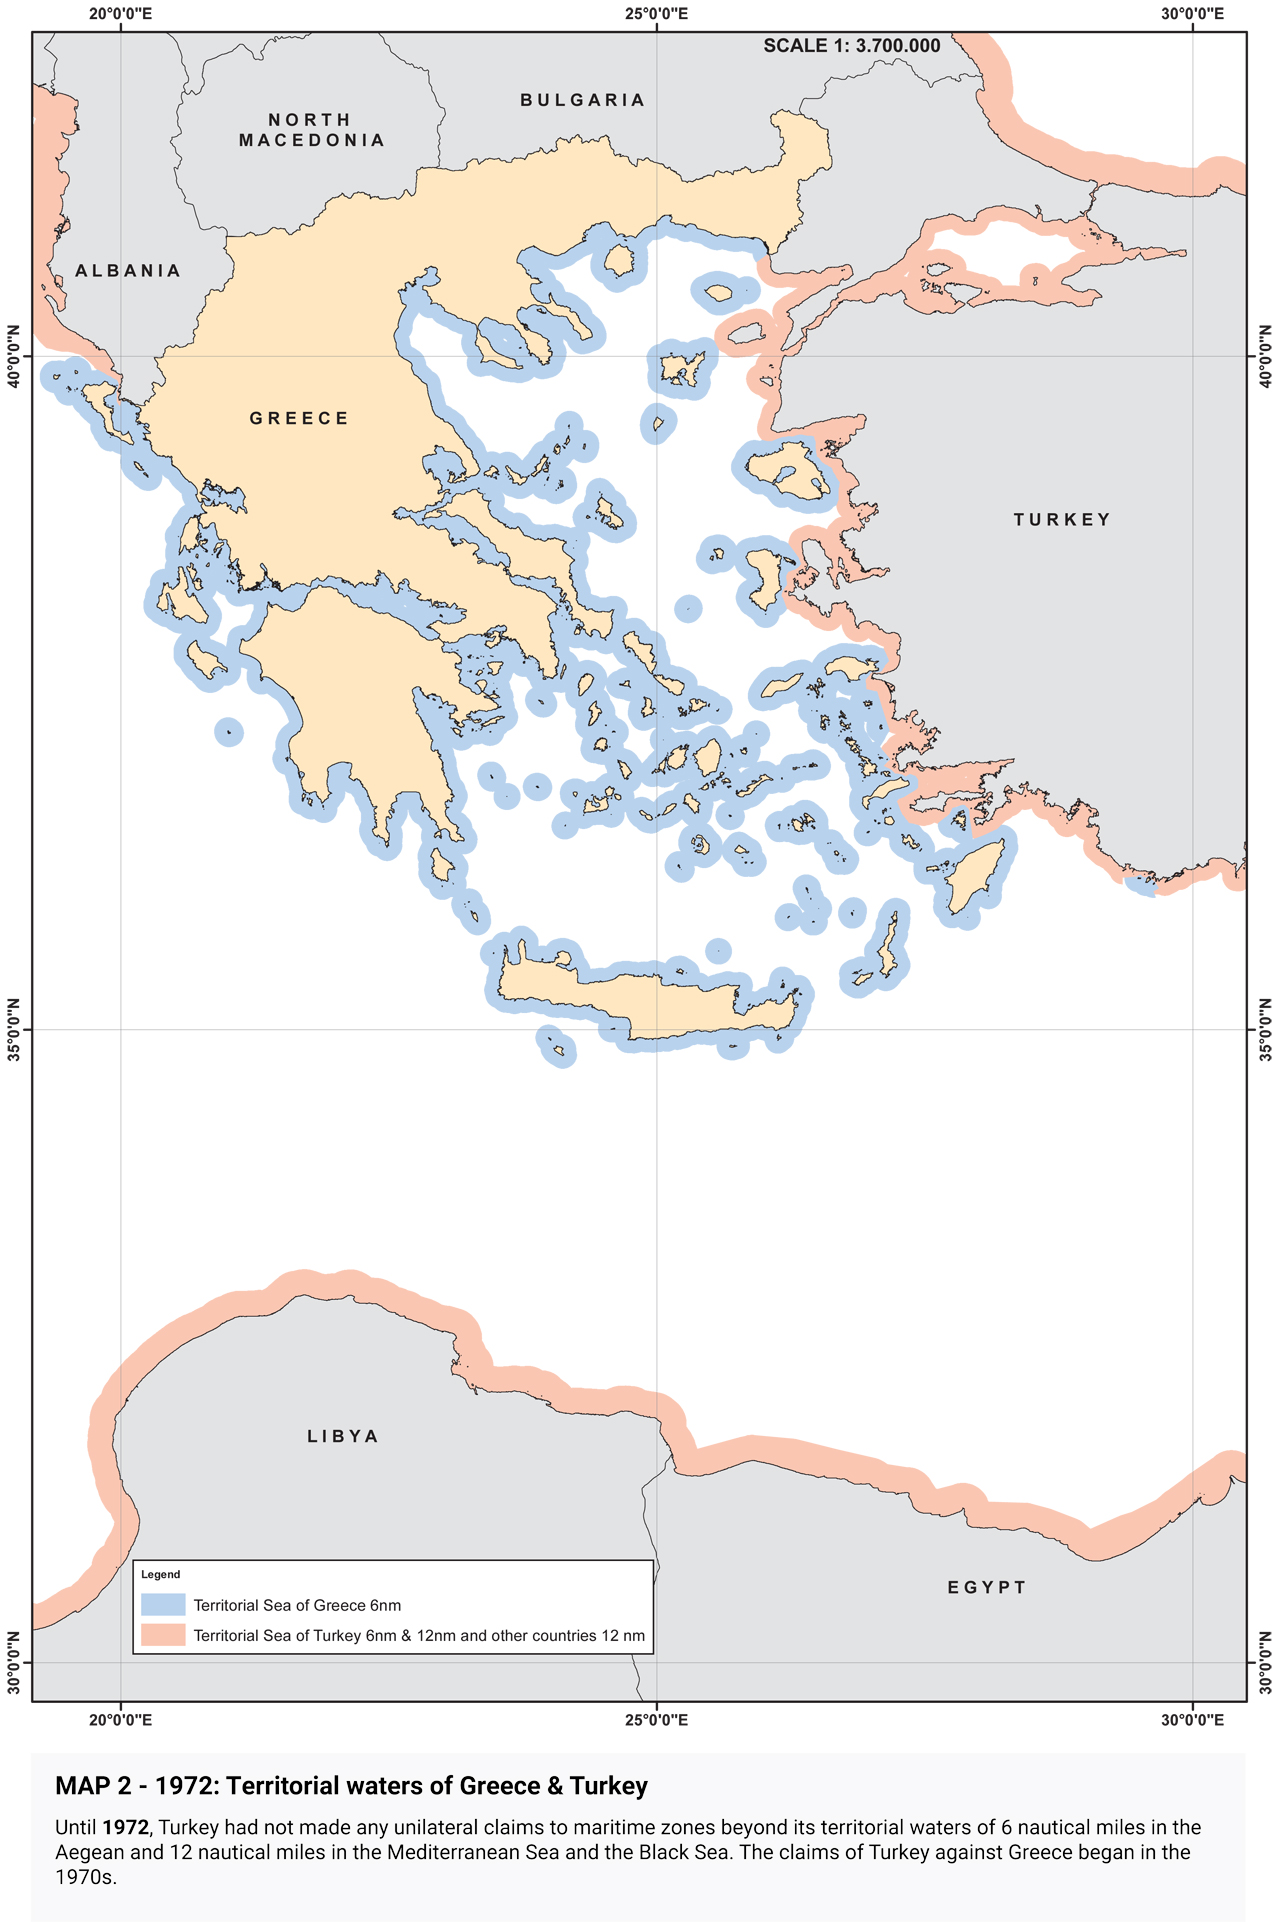 greece-responds-to-turkish-claims-about-islands-with-maps3